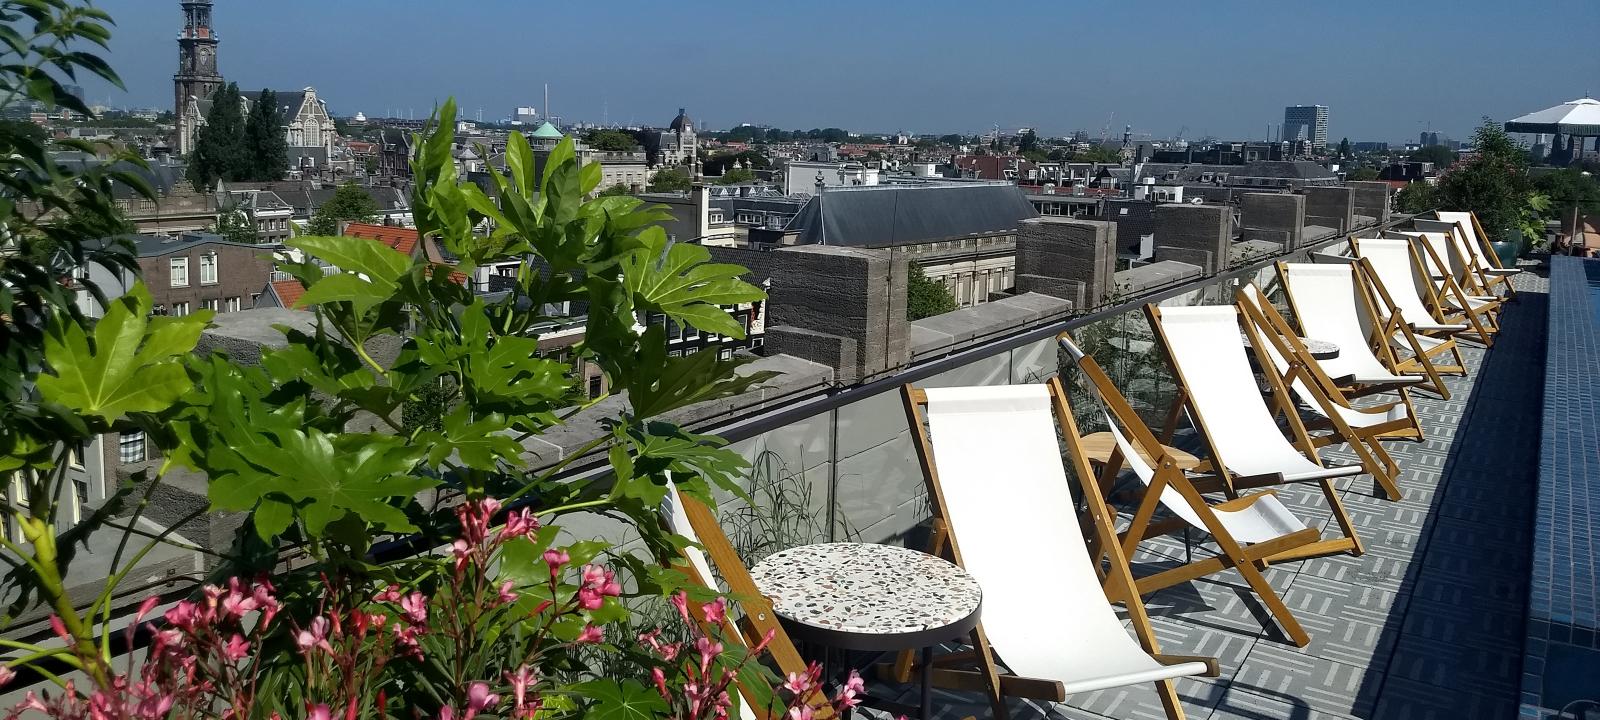 Sundeck chairs on a roof terrace